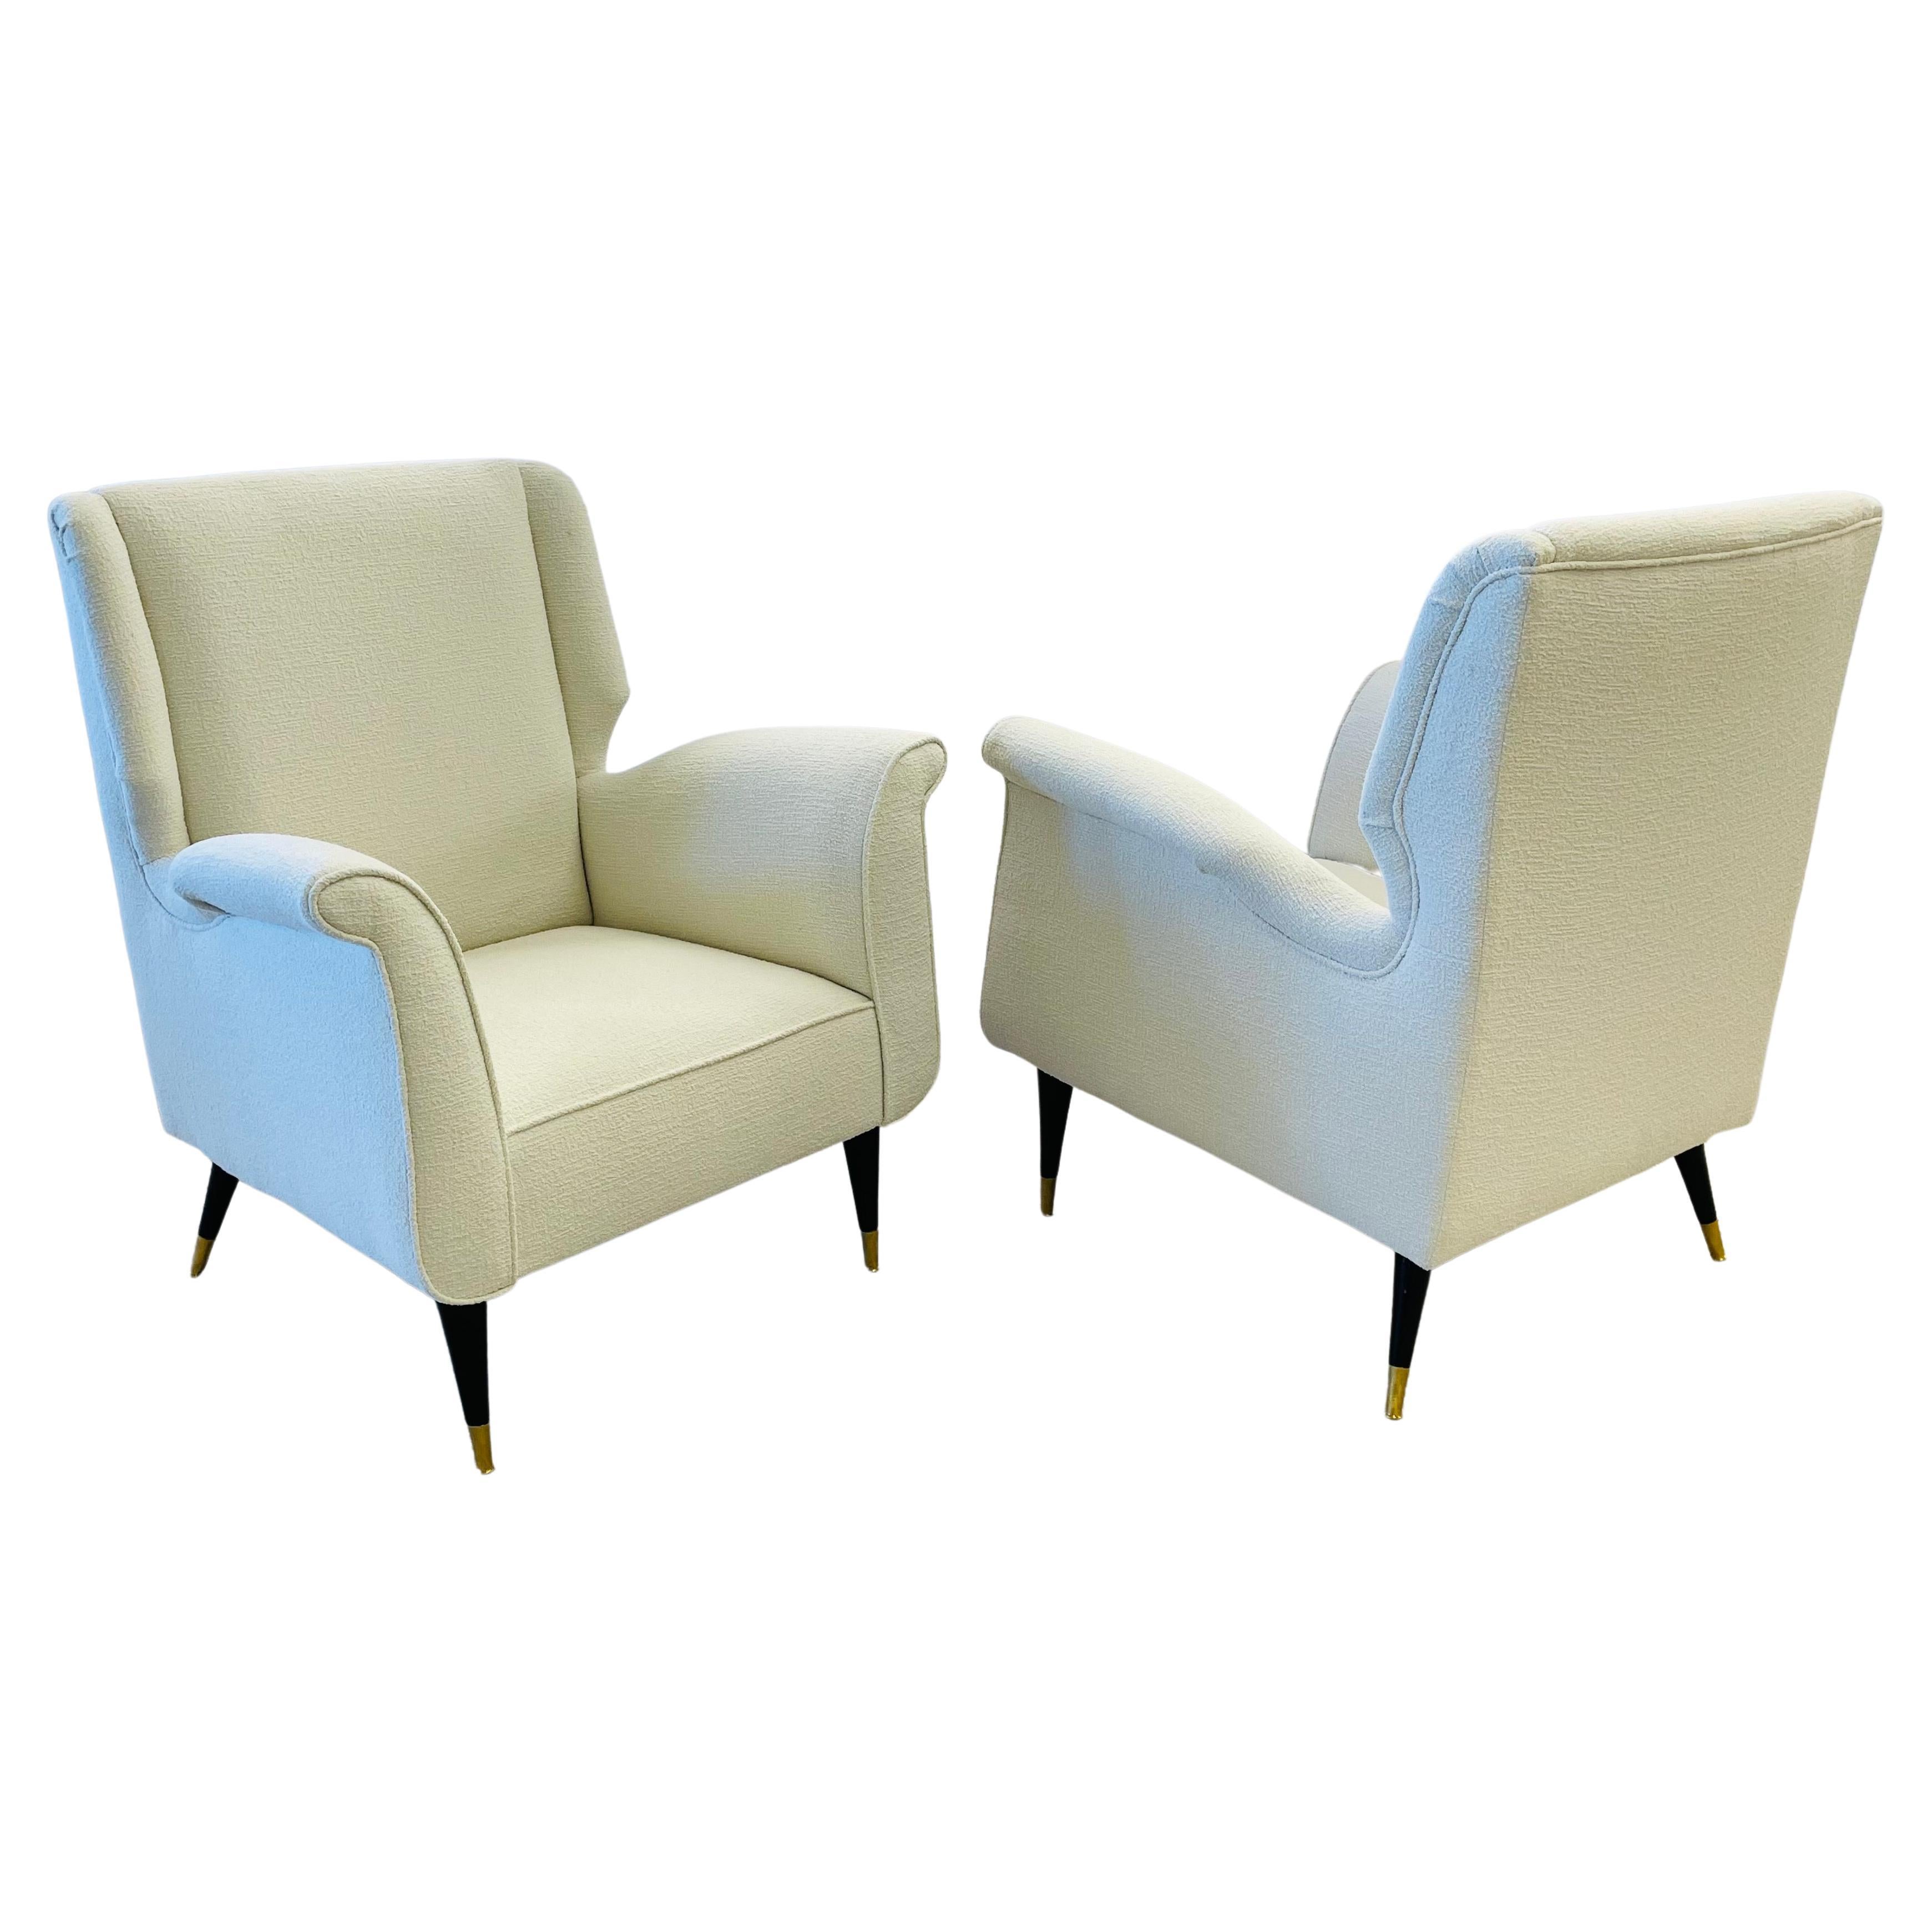 Mid-Century Modern Gio Ponti Style Armchairs, Wingback, a Pair in Kravet Bouclé For Sale